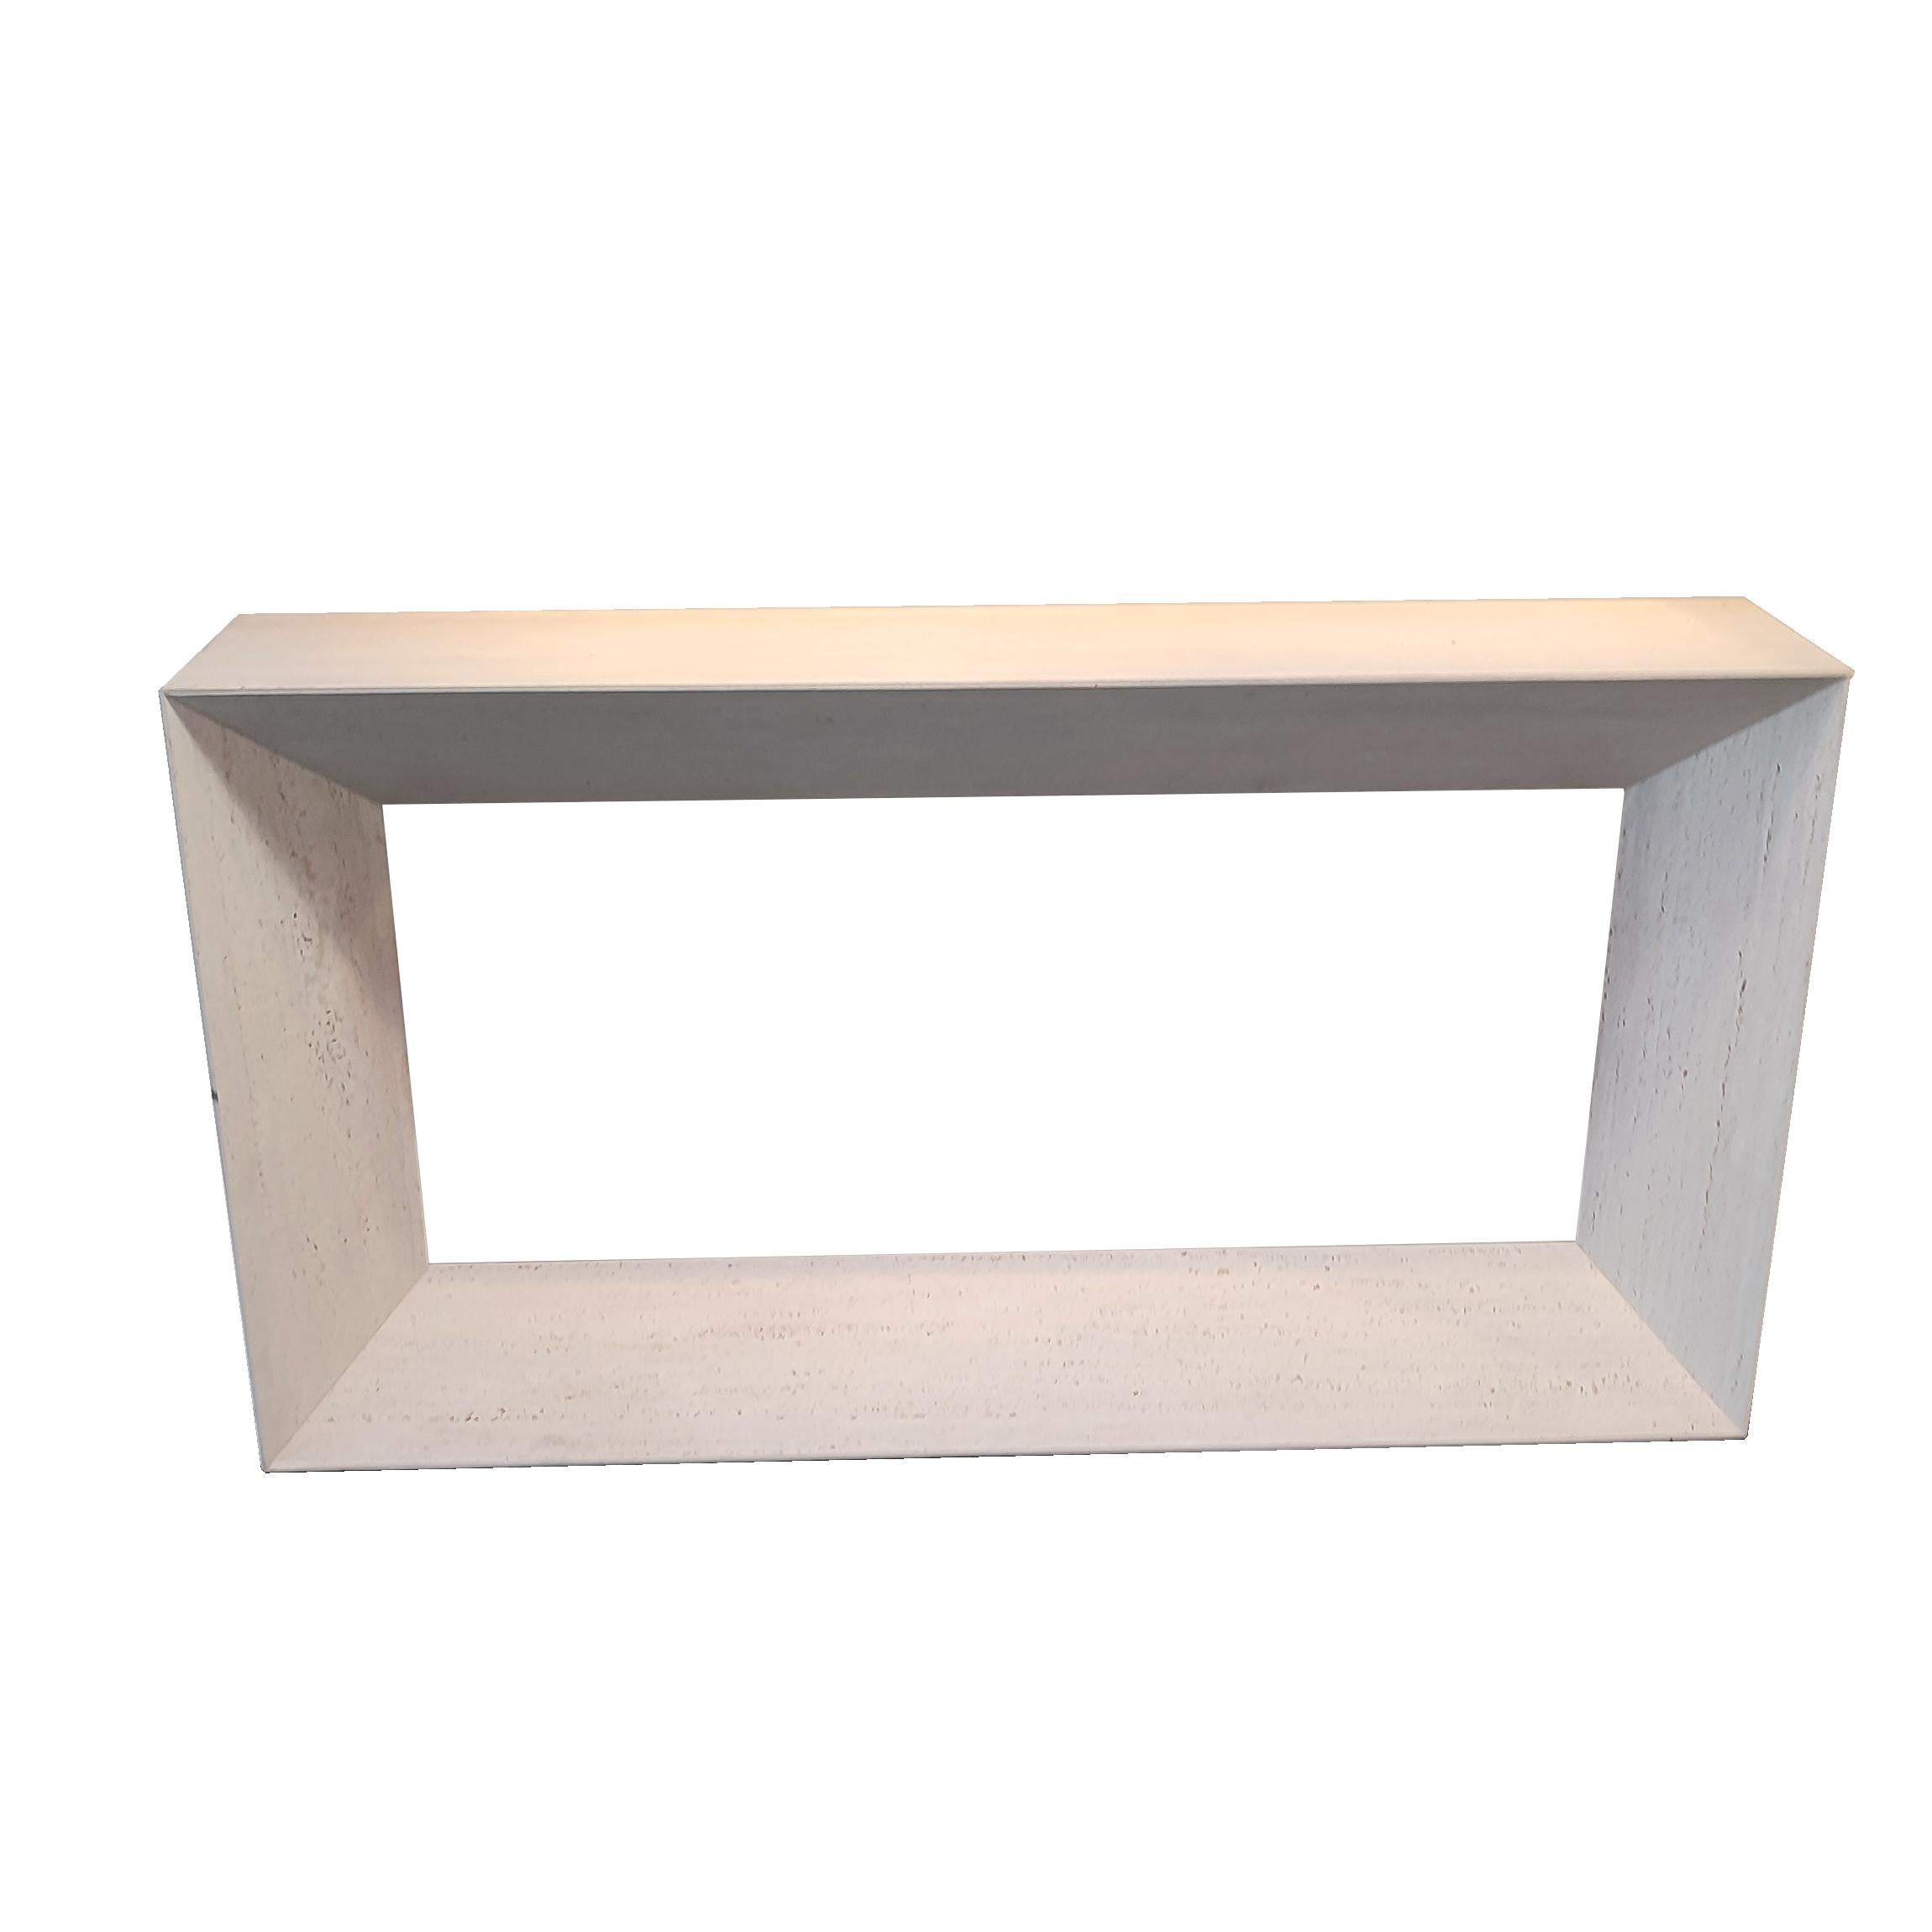 MYA Travertine Marble Console Table Made in Spain Contemporary Design In Stock
Beautiful Italian natural travertine marble console table, a design by Joaquín Moll and 100% Made in Spain by Meddel Spain. The MYA console table in travertine marble is